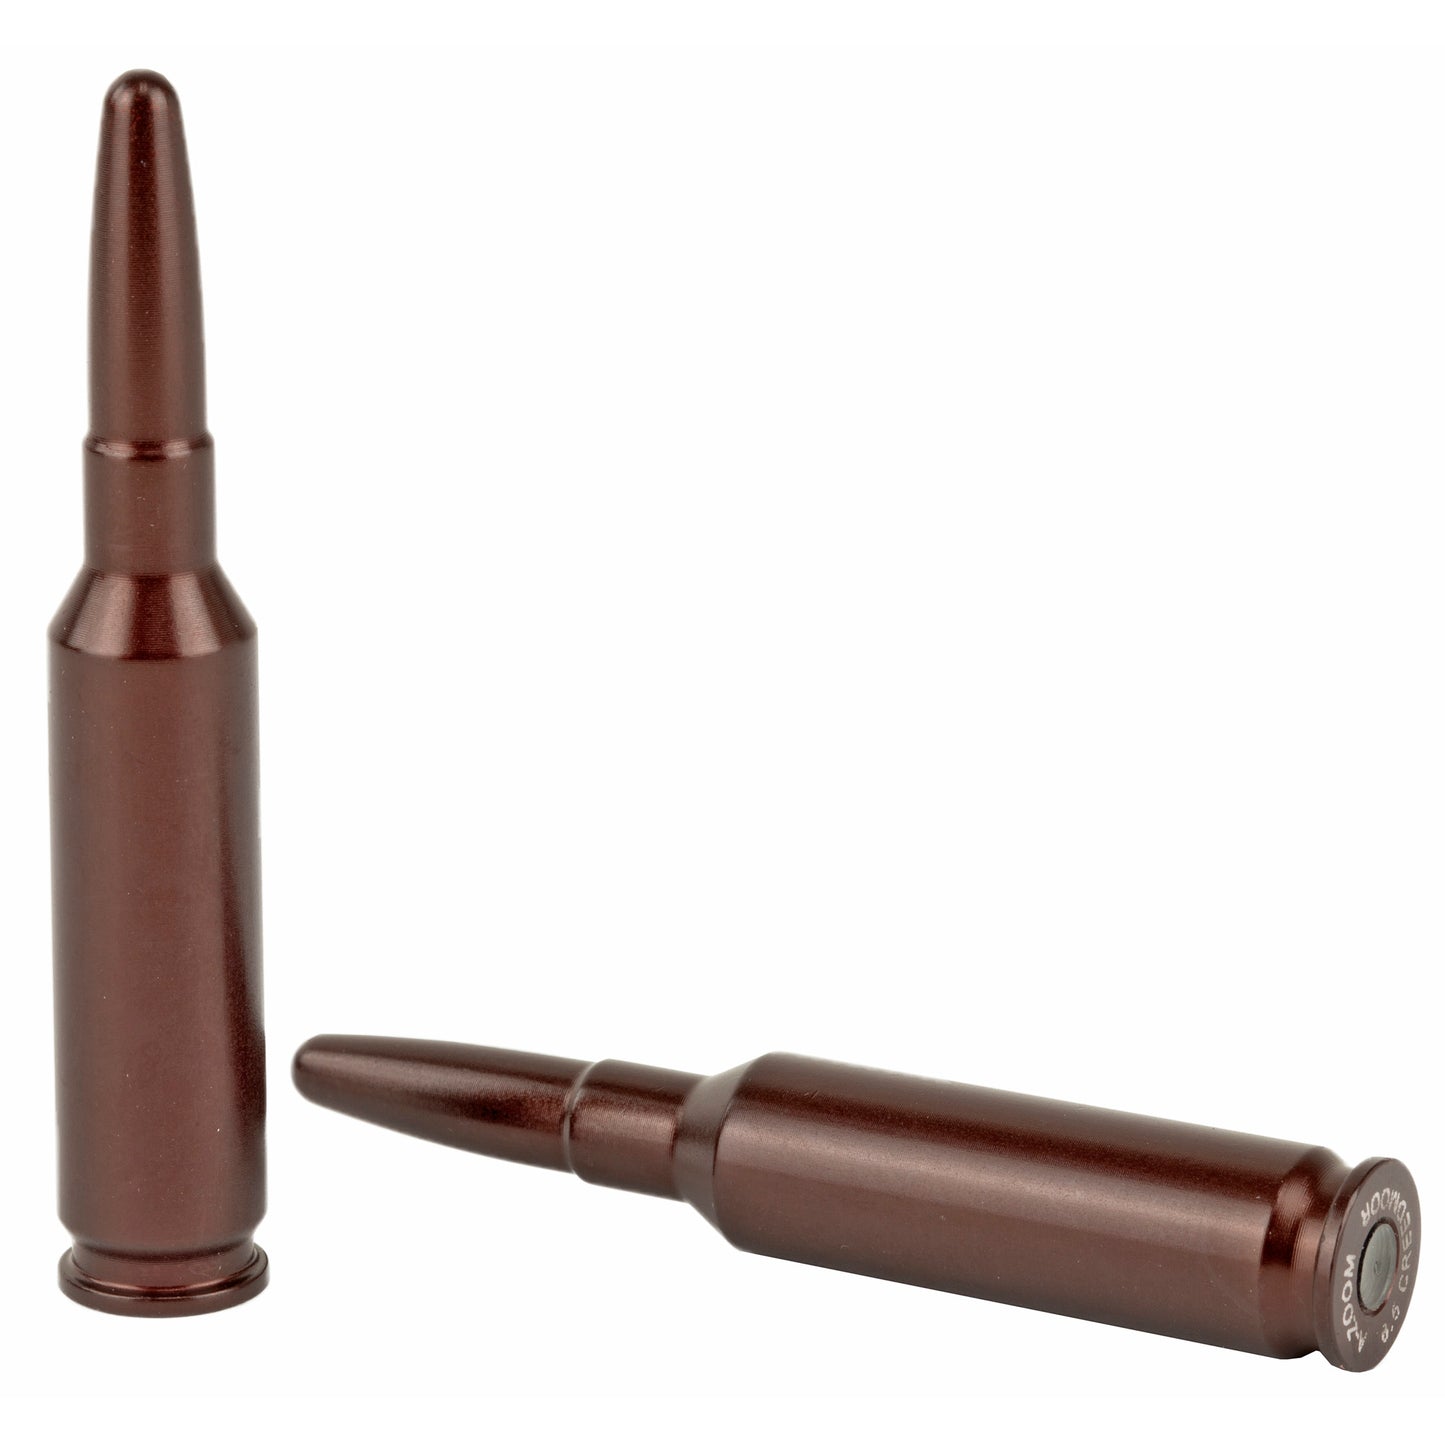 A-Zoom Snap Caps safety training 6.5 Creedmoor 2 Pack solid aluminum 12300 - California Shooting Supplies